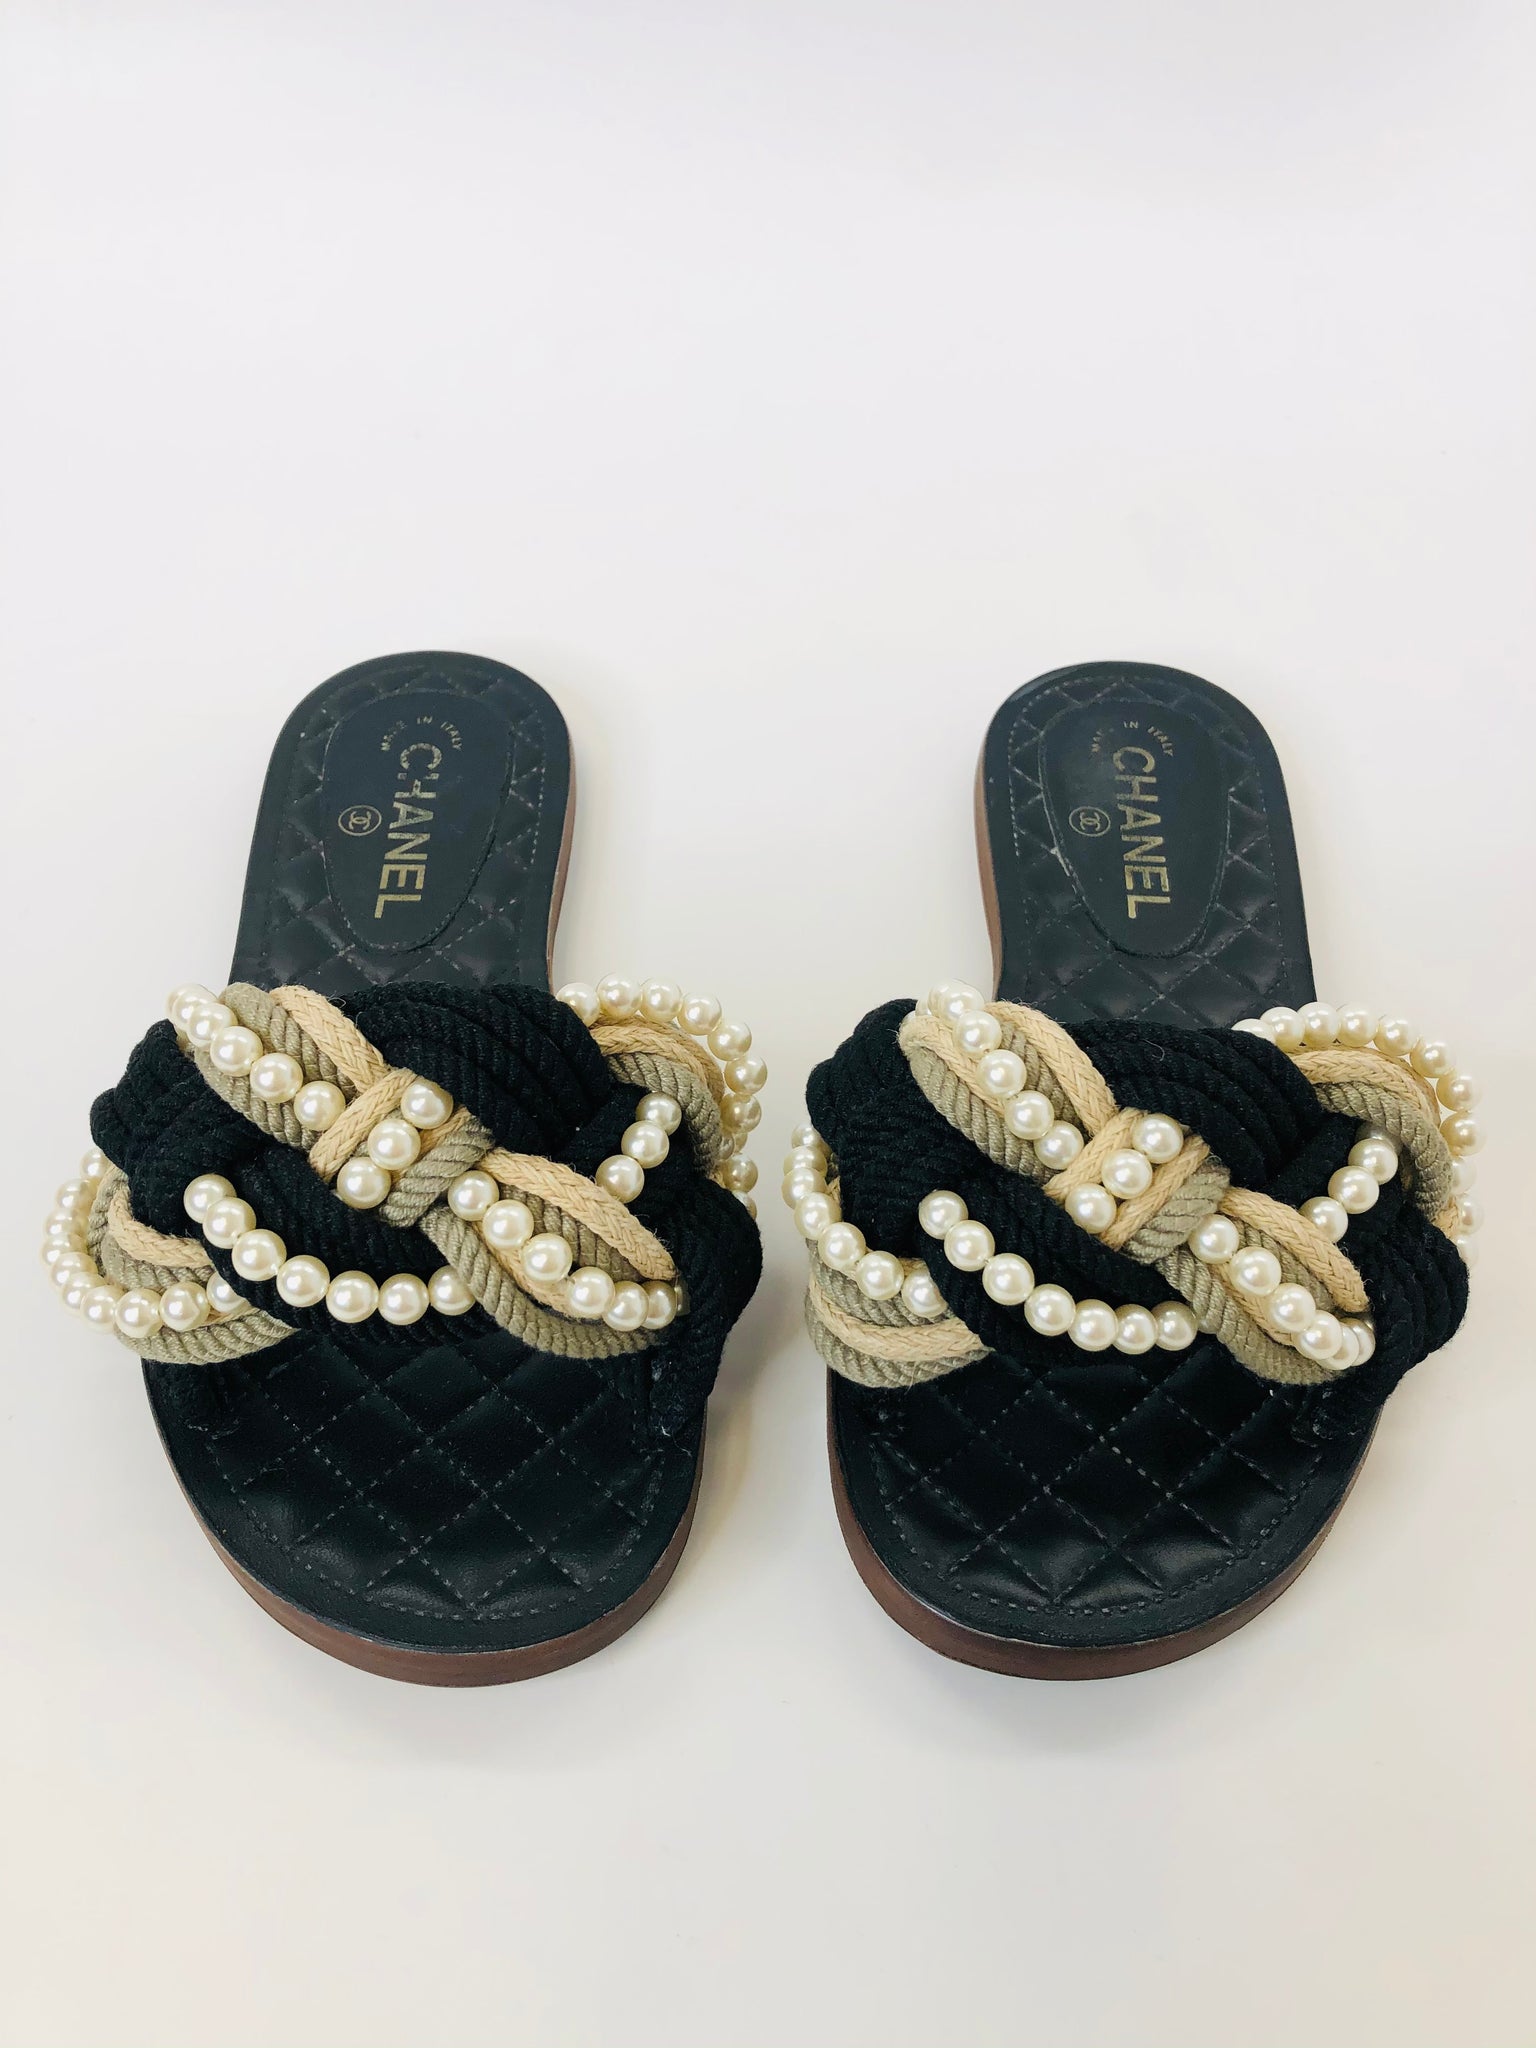 Chanel Cruise Sandals